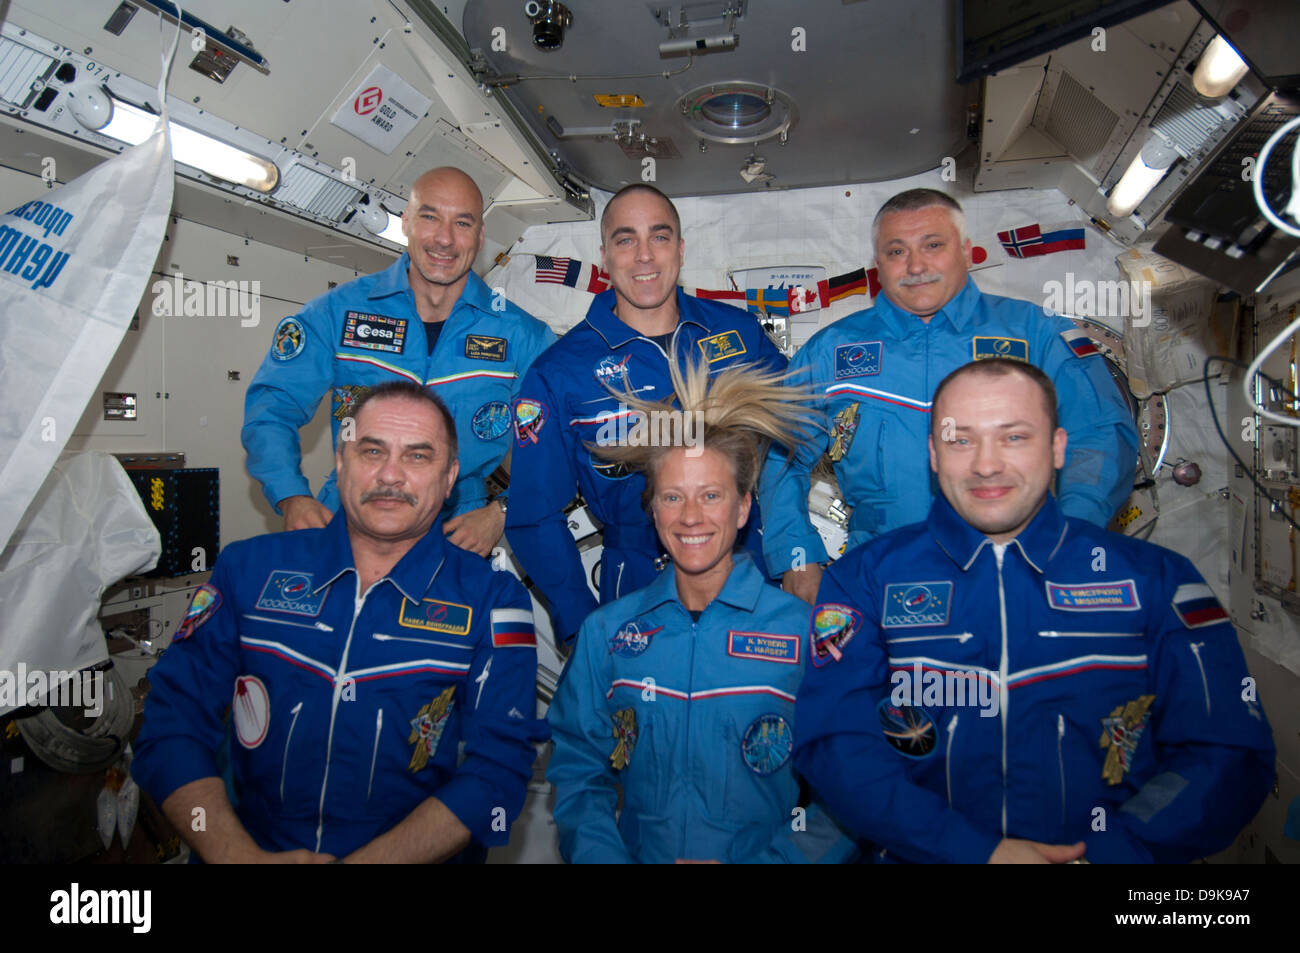 Floating inside the Kibo laboratory in the International Space Station, the six Expedition 36 crew members videotape a tribute to cosmonaut Valentina Tereshkova, who on June 16 will mark the 50th anniversary of her 1963 launch aboard the Soviet Vostok-6 spacecraft June 8, 2013. On the bottom row from left are Expedition 36 Commander Pavel Vinogradov of Russia's Federal Space Agency and Flight Engineers Karen Nyberg of NASA and Alexander Misurkin of Roscosmos. On top are from left Flight Engineers Luca Parmitano of the ESA, Chris Cassidy of NASA and Fyodor Yurchikhin of Roscosmos. Stock Photo